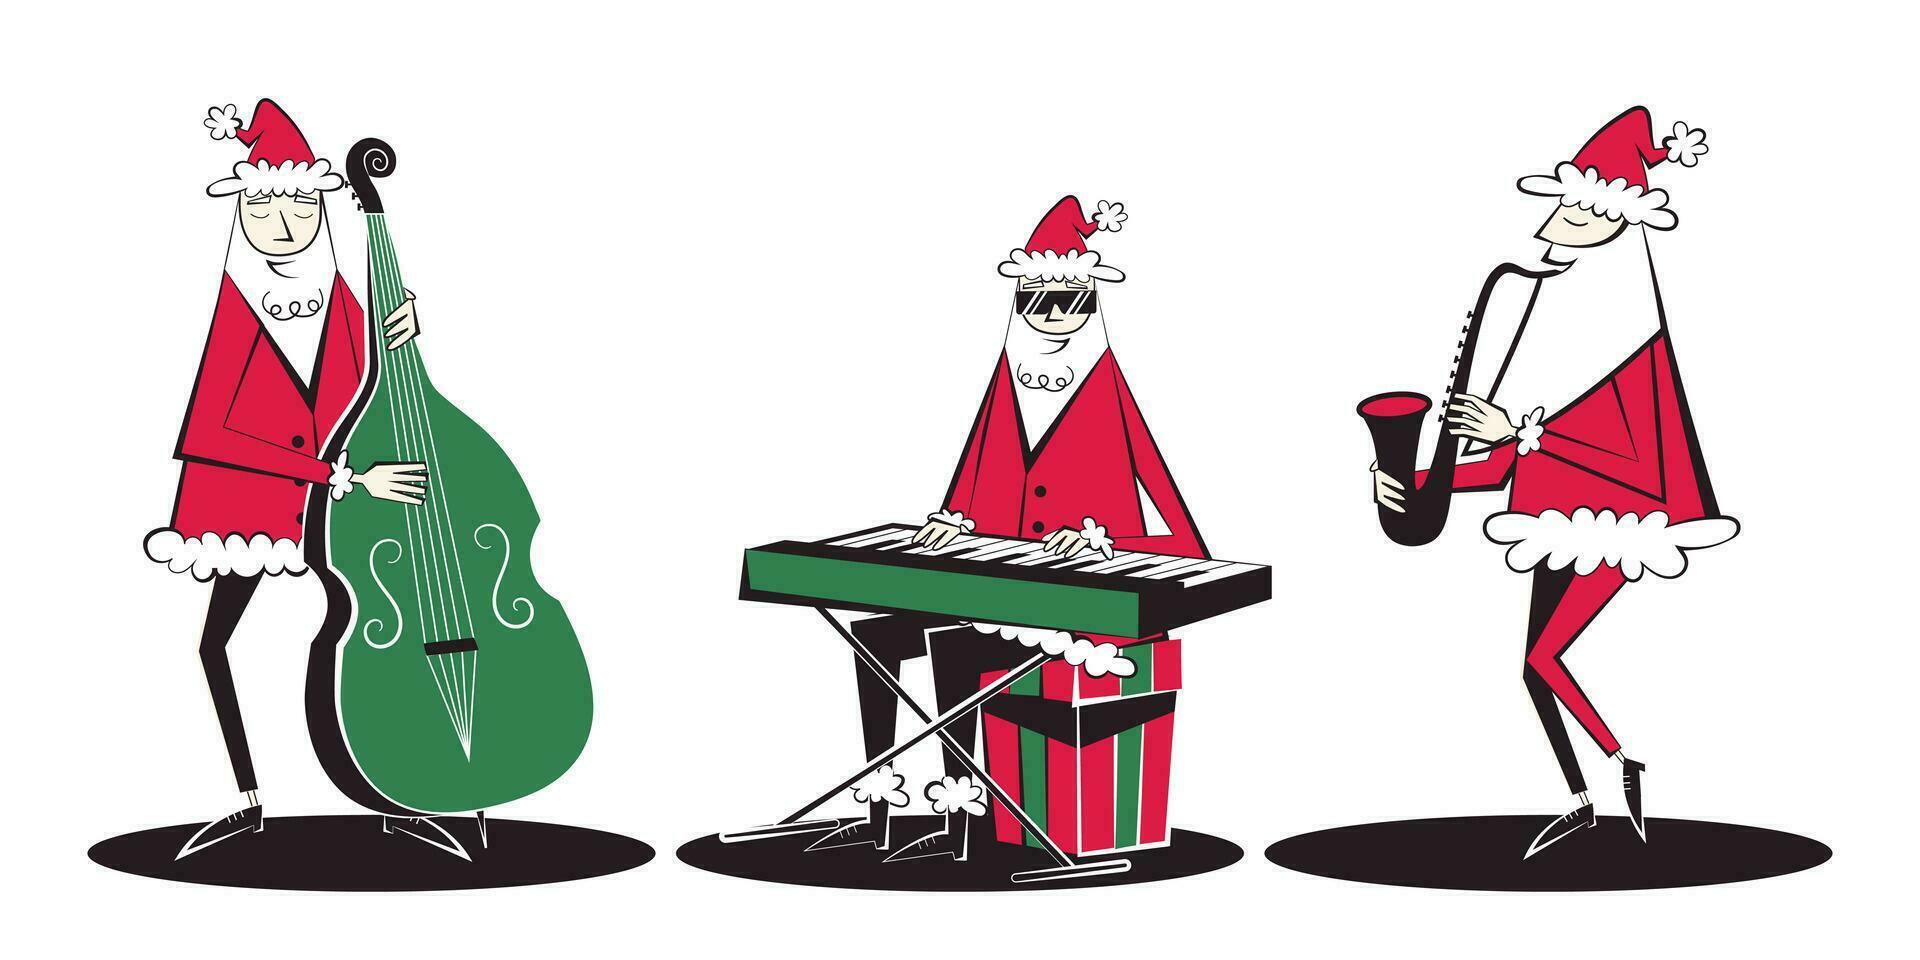 Set of three Santa Claus characters in retro style of 60s-70s. Christmas vector illustration of band of Santas playing double bass, piano and saxophone.